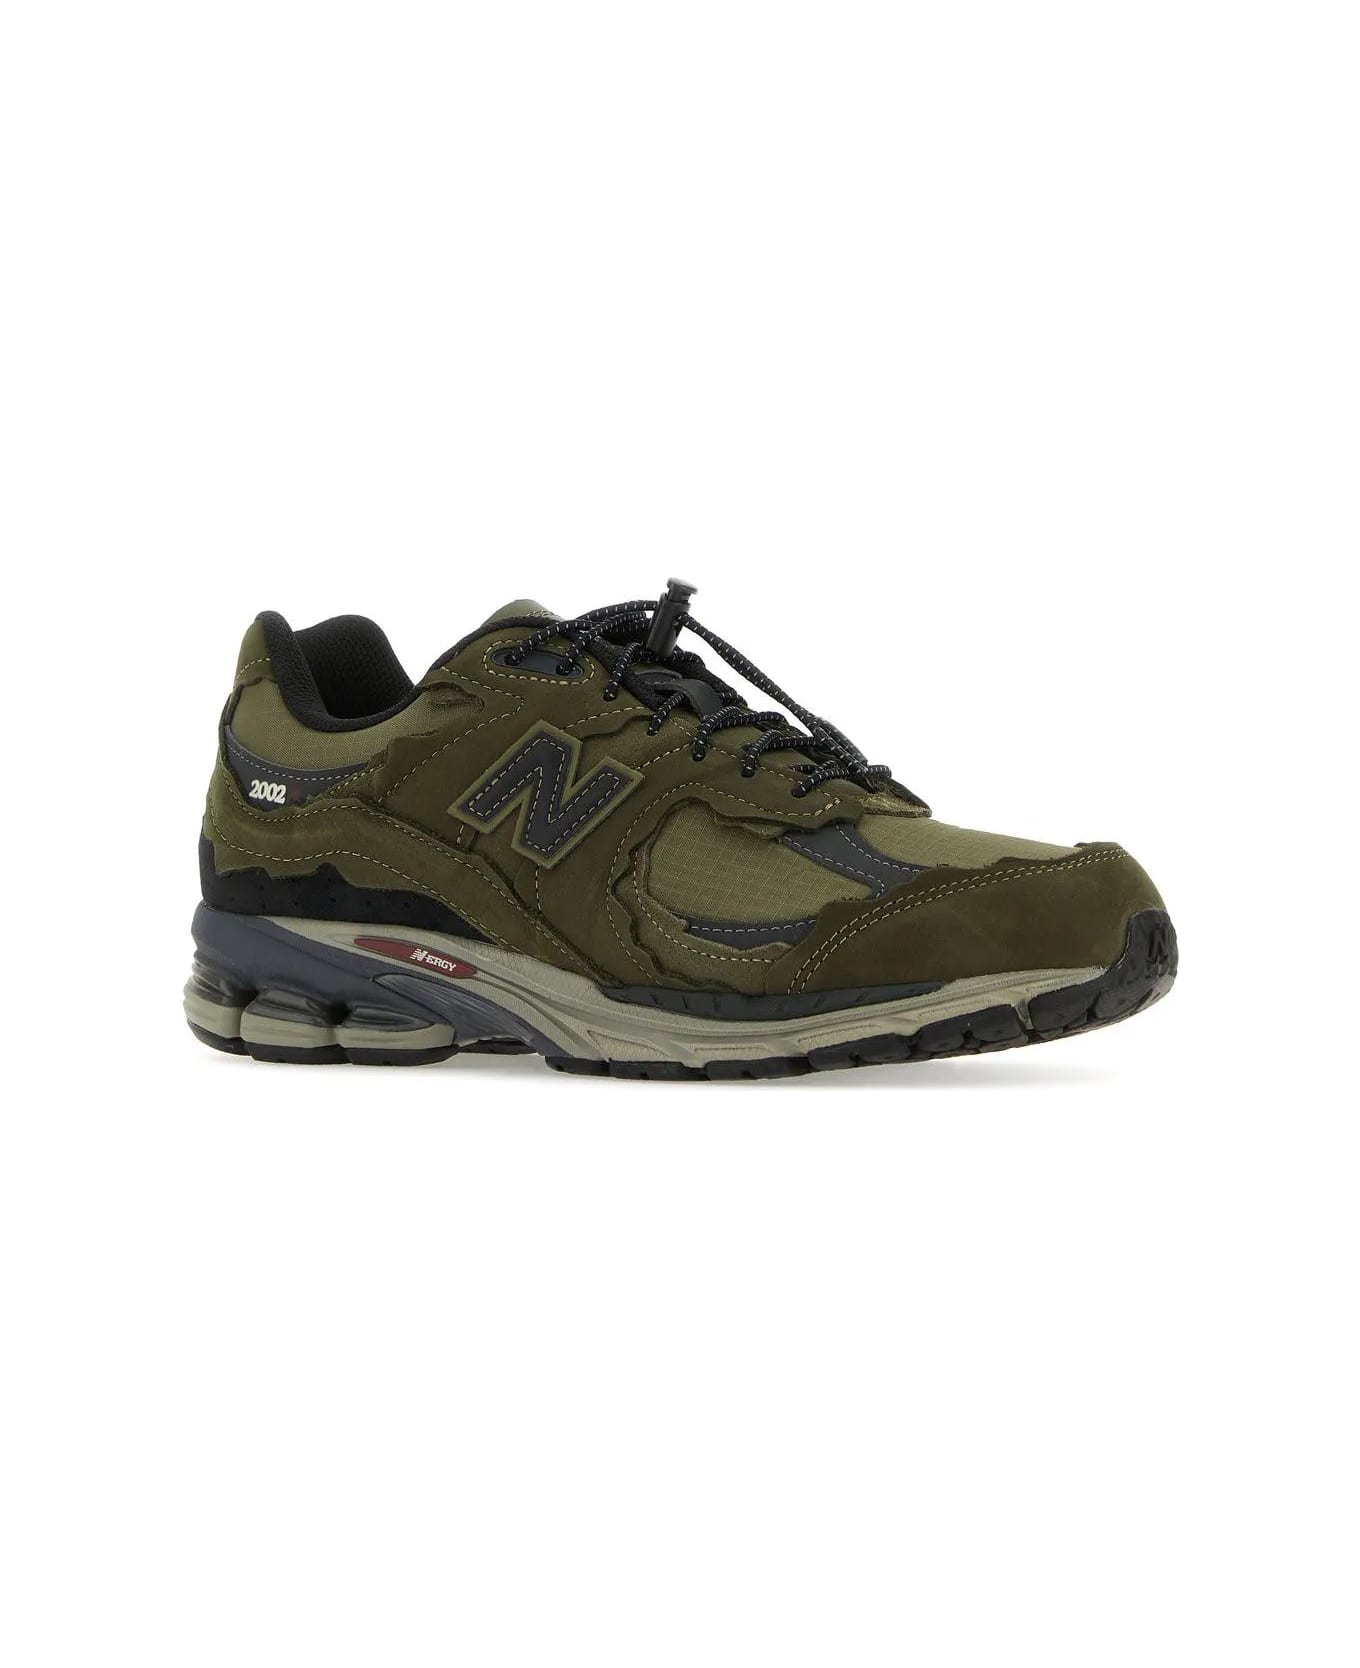 New Balance Multicolor Suede And Fabric 2002r Sneakers - Camouflage スニーカー